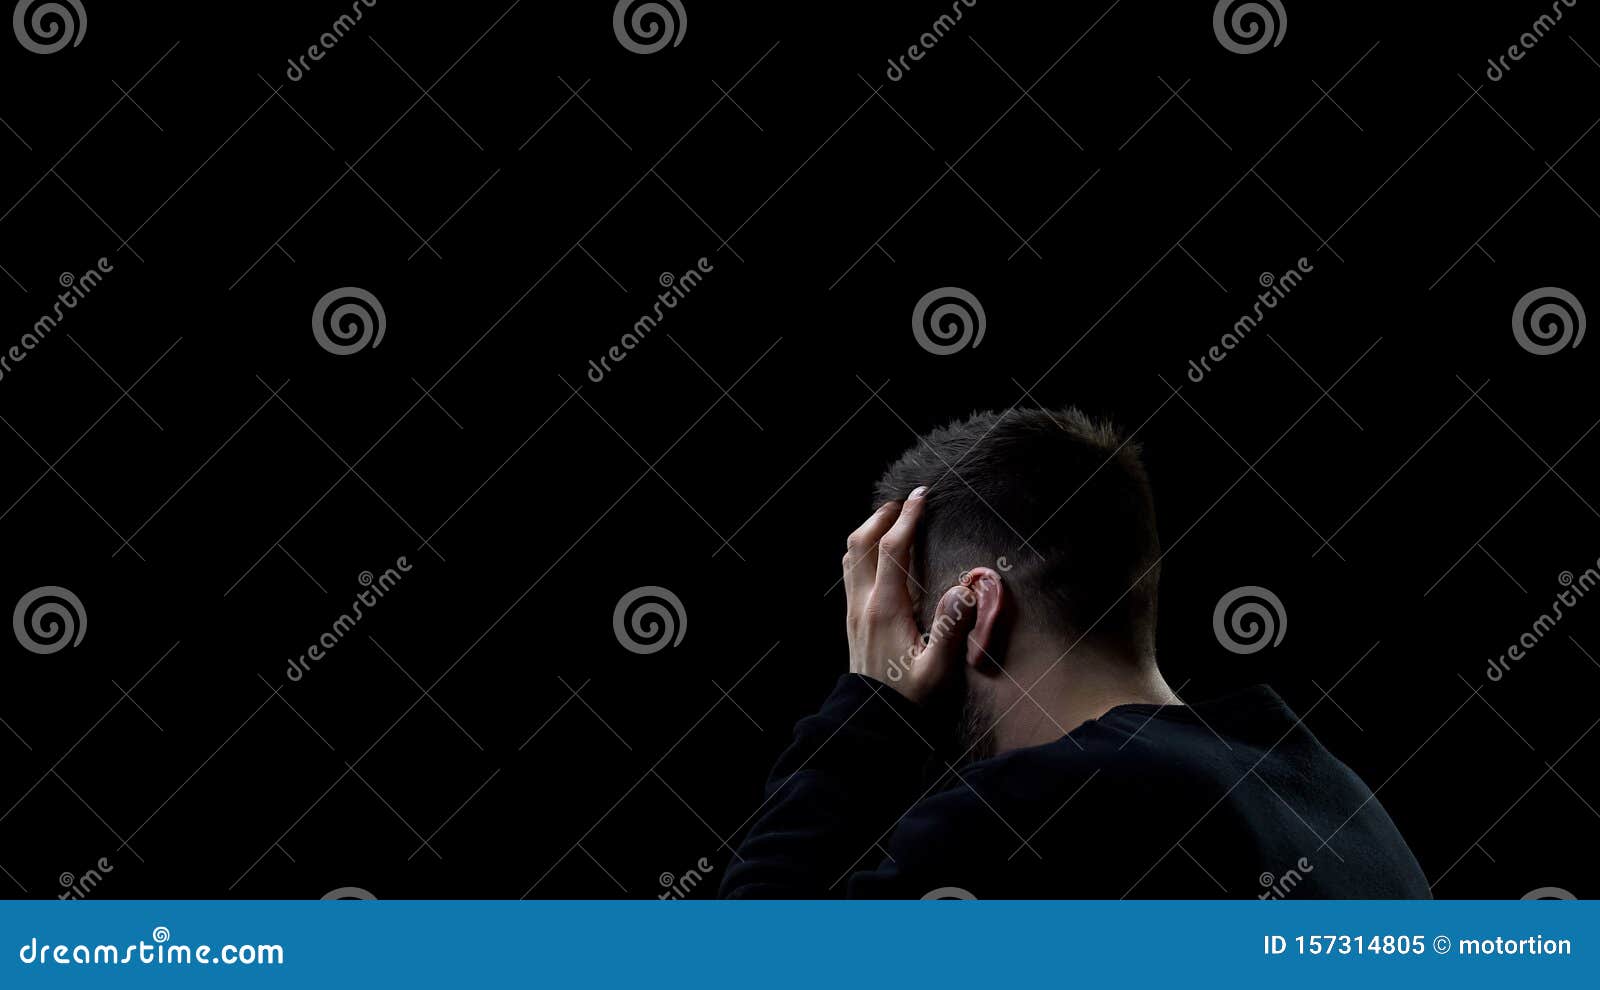 desperate man covering head by hands, feeling of hopelessness, life crisis